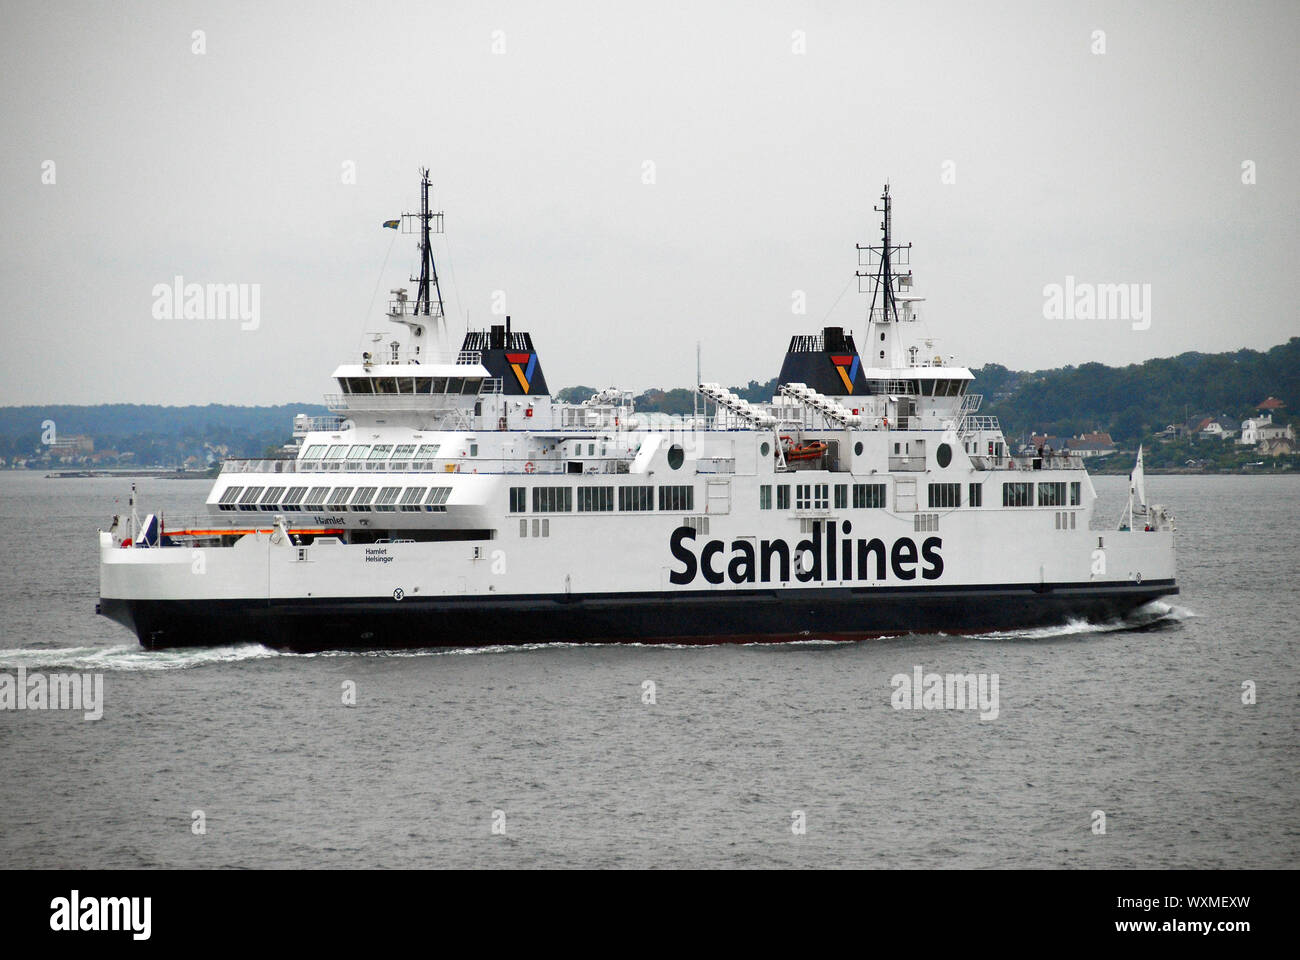 A scandlines ferry boat going from Denmark to Sweden Stock Photo